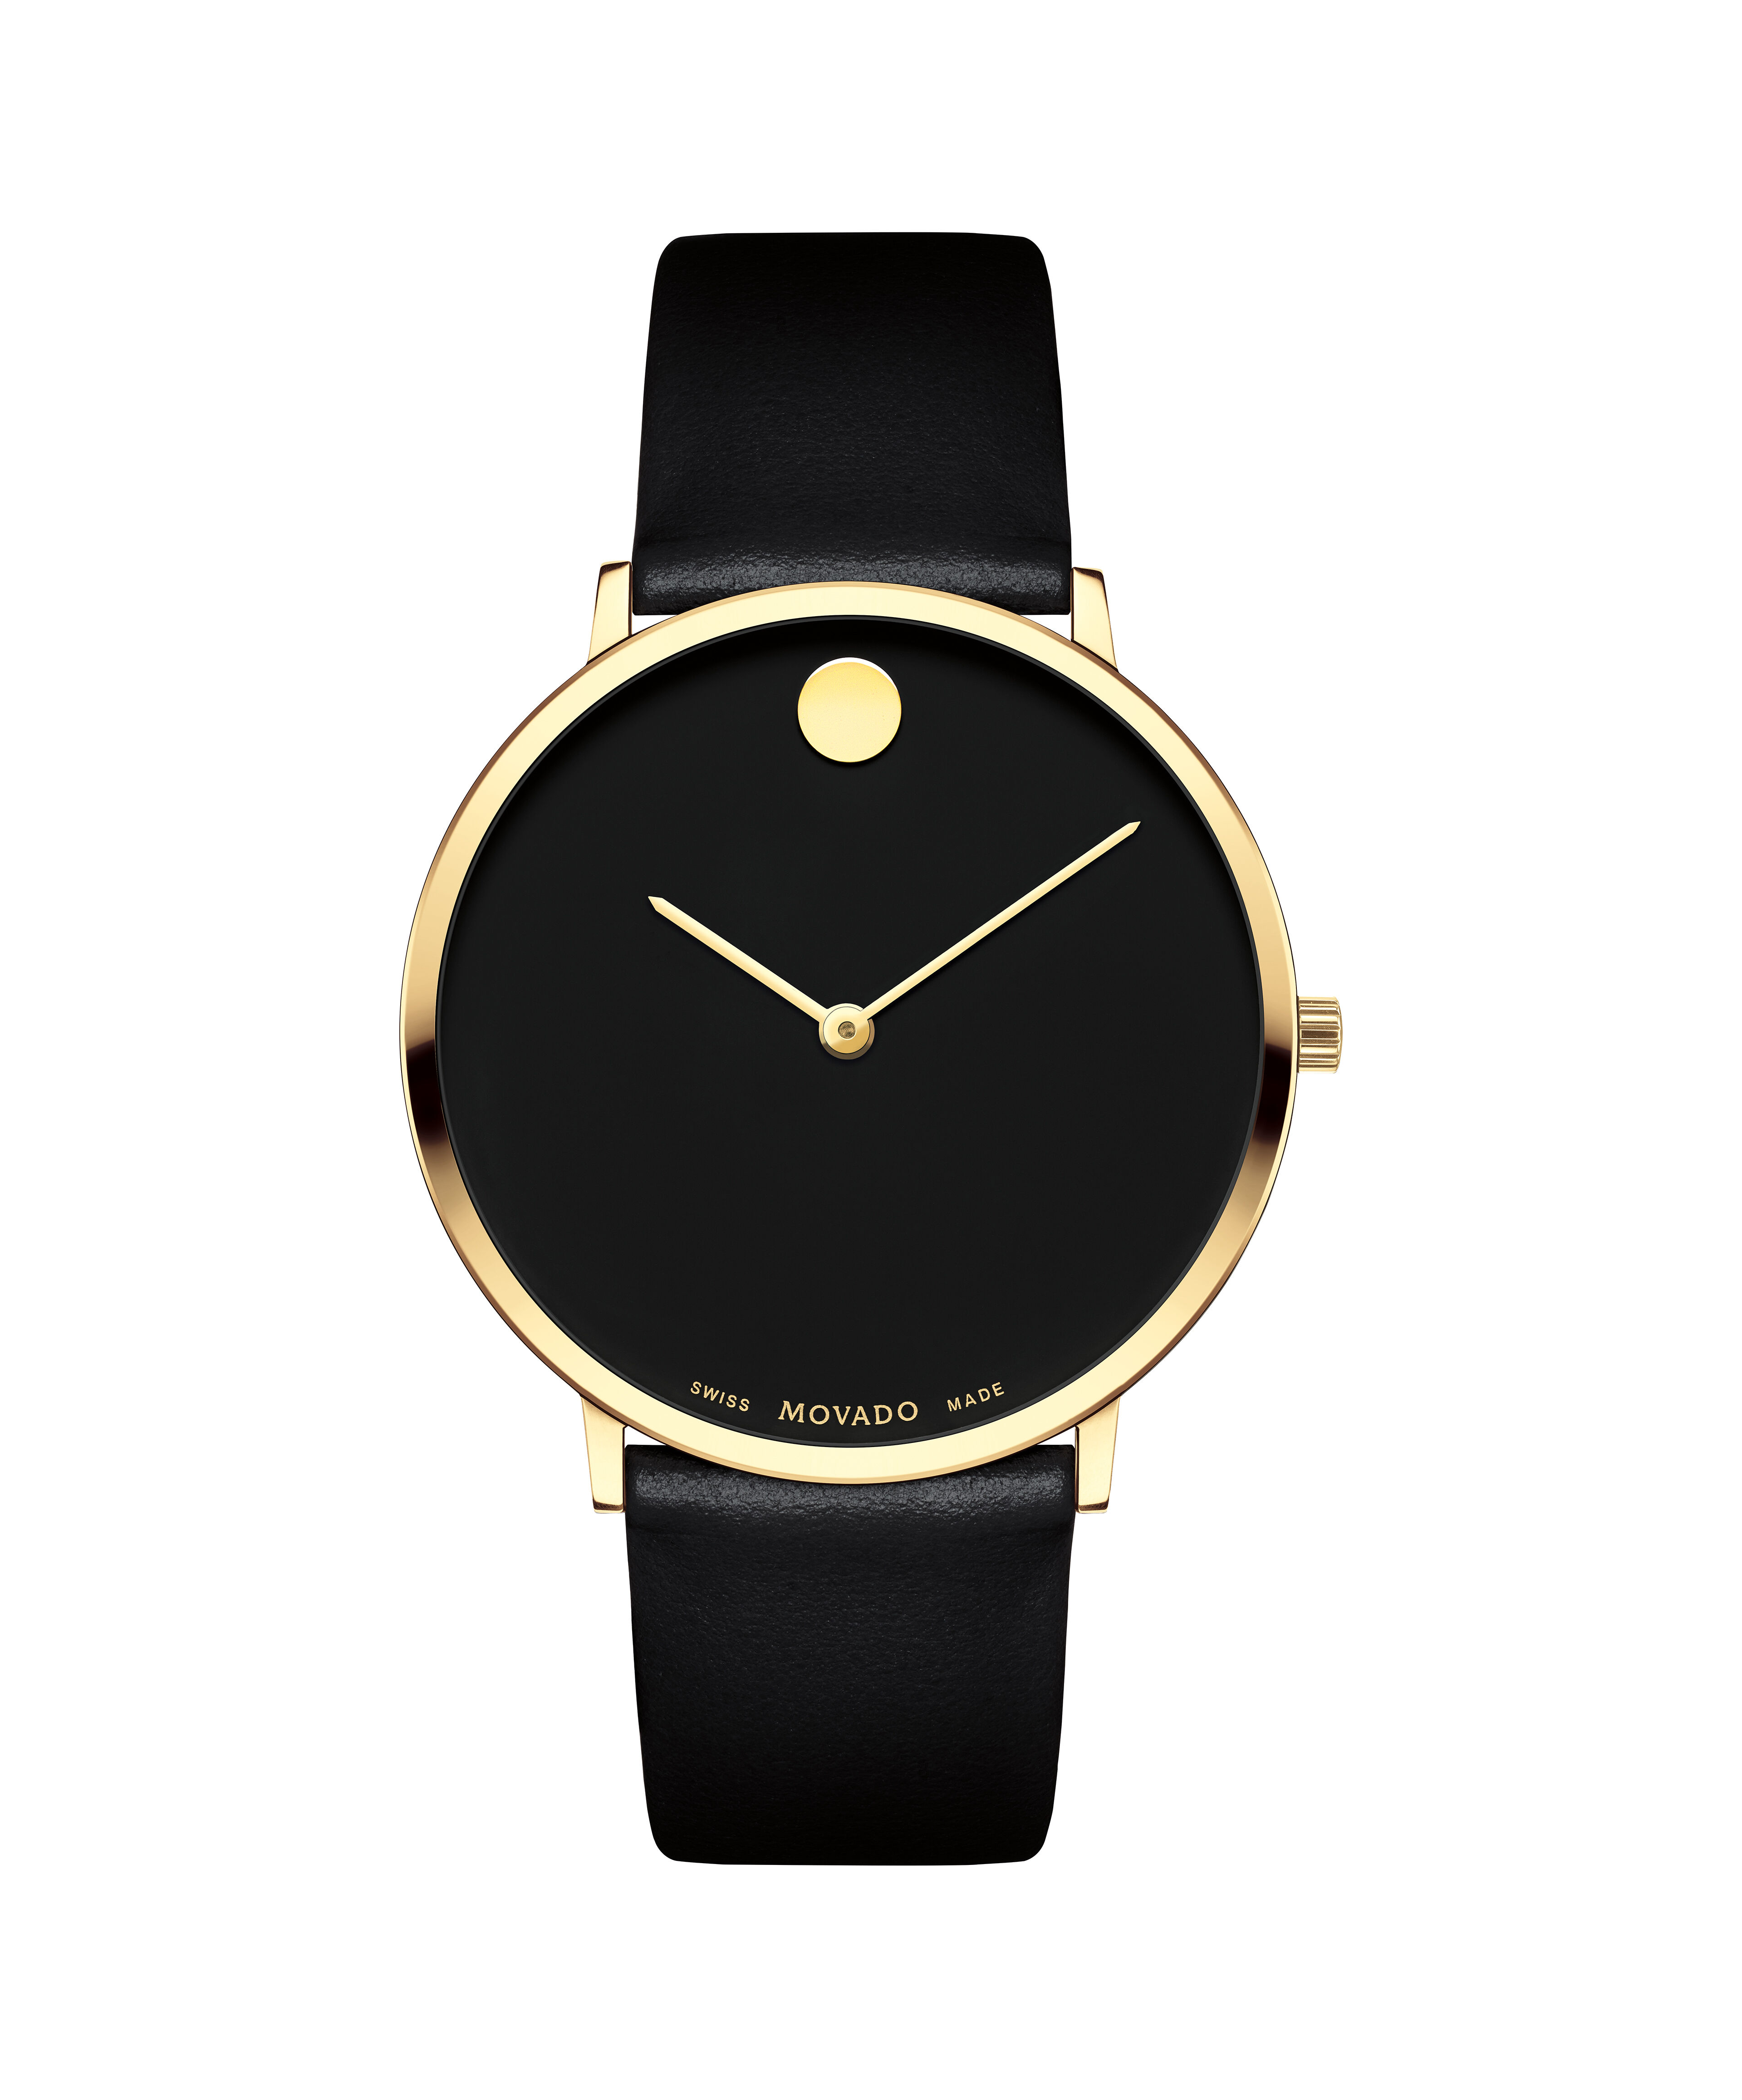 Movado Vintage from 1950's in solid 18k / 750 Gold / Serviced